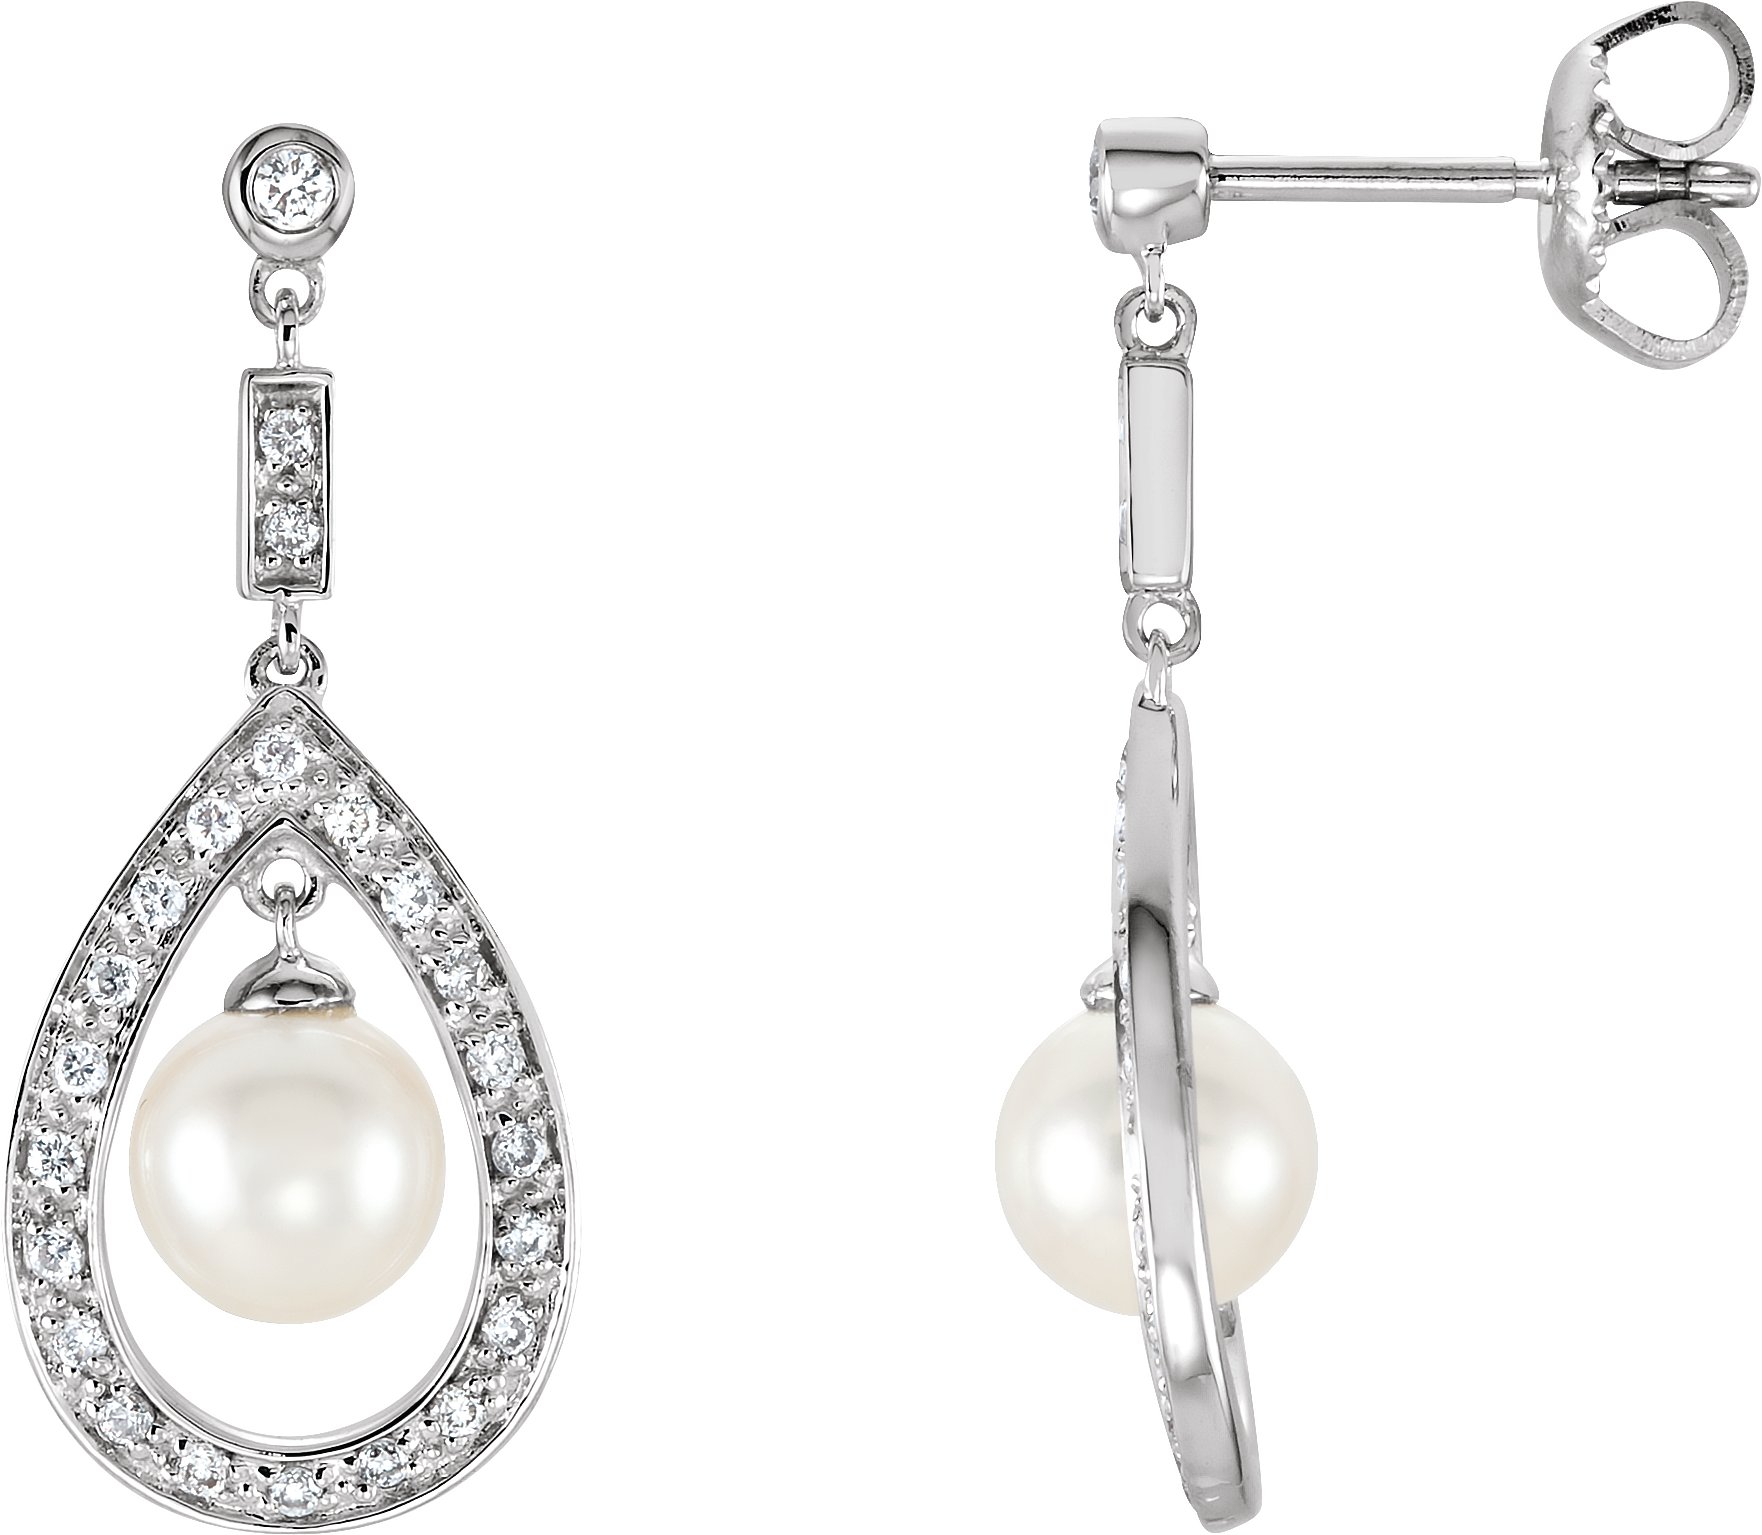 14K White Freshwater Cultured Pearl and .25 CTW Diamond Earrings Ref. 1848783